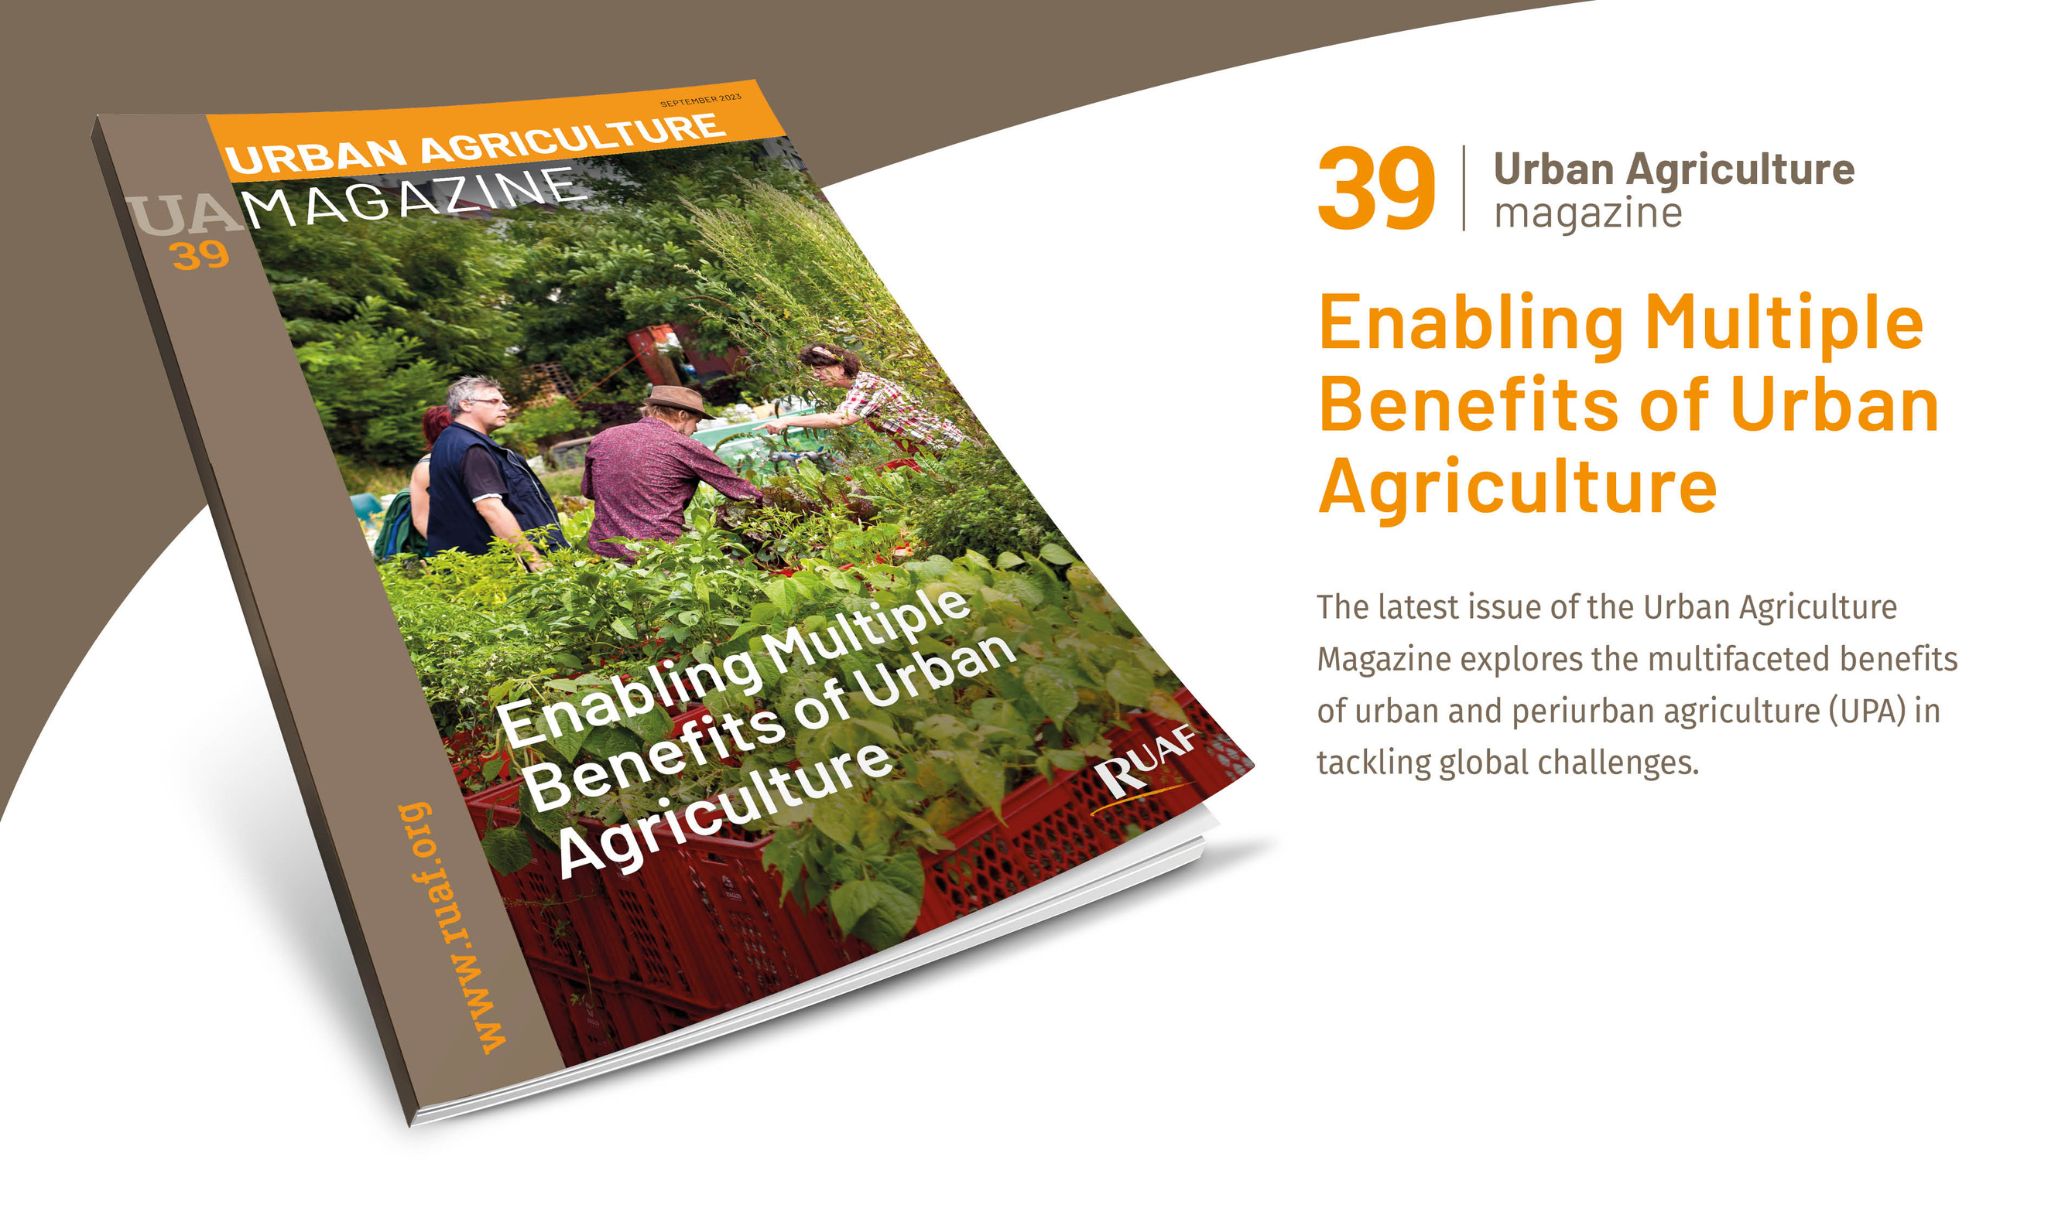 Launch of the Urban Agriculture Magazine 39: Enabling Multiple Benefits of Urban Agriculture